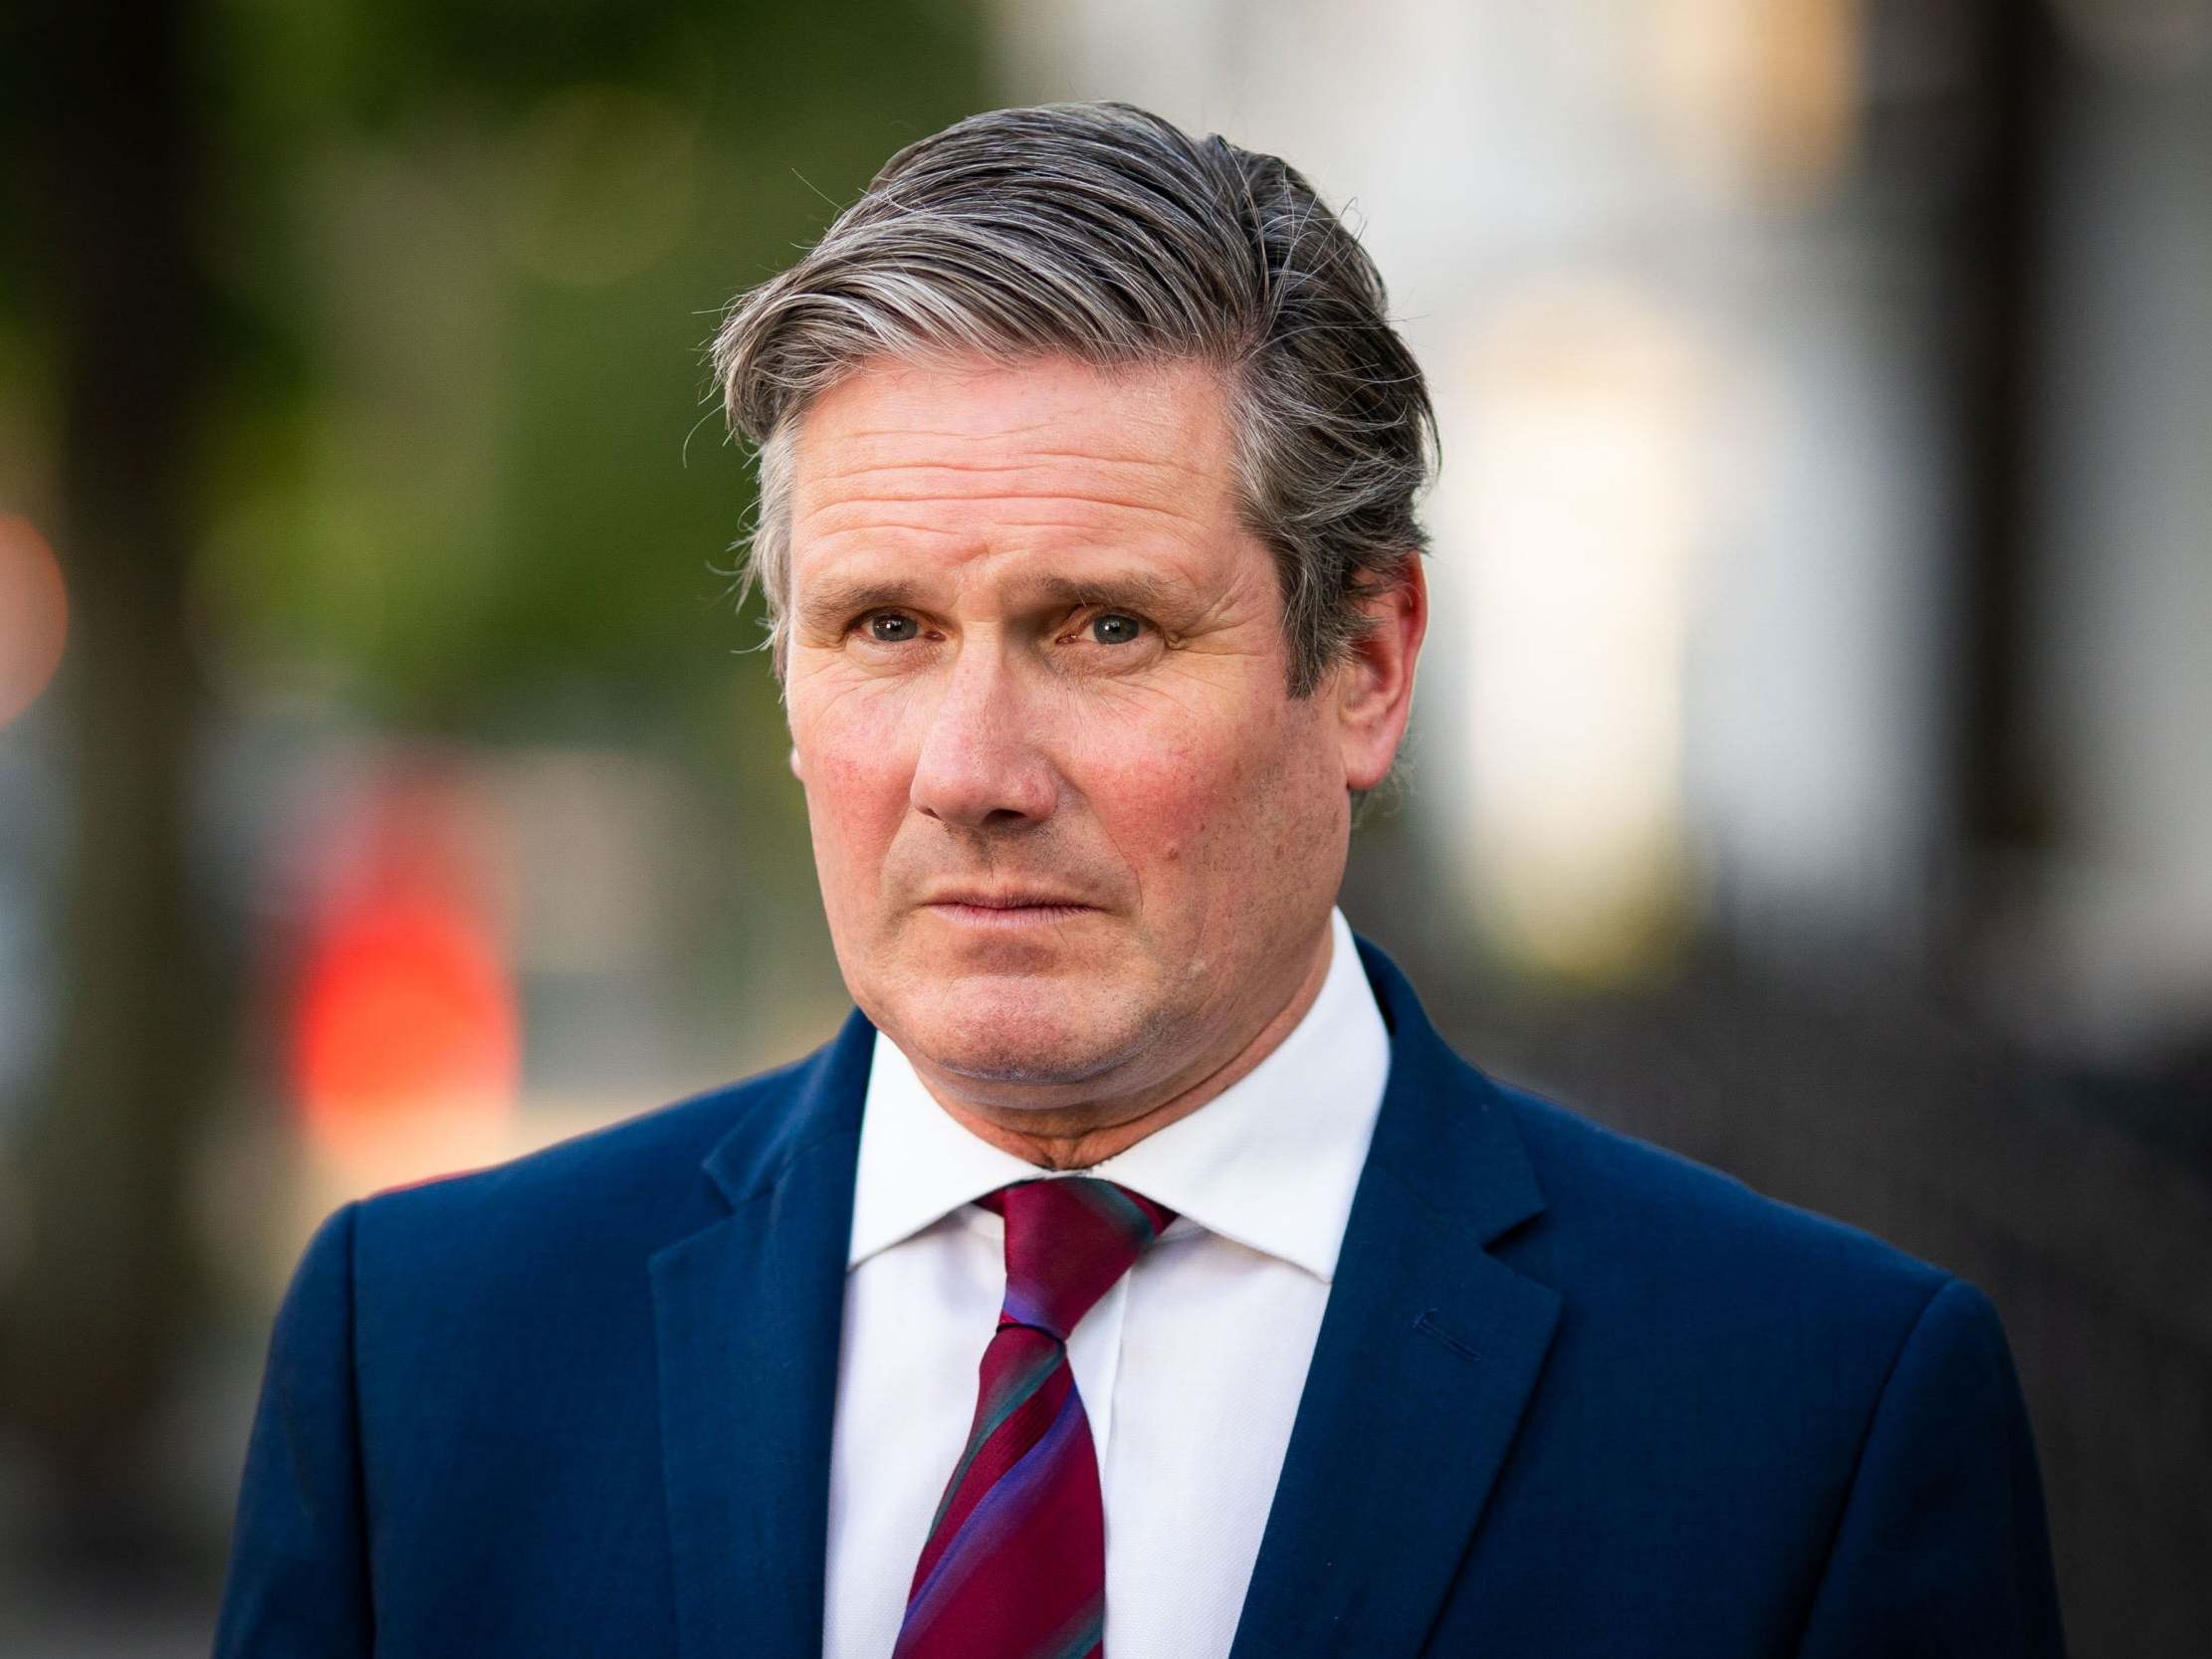 UK: Sir Keir Starmer is the new Labour Party leader, replacing Jeremy ...